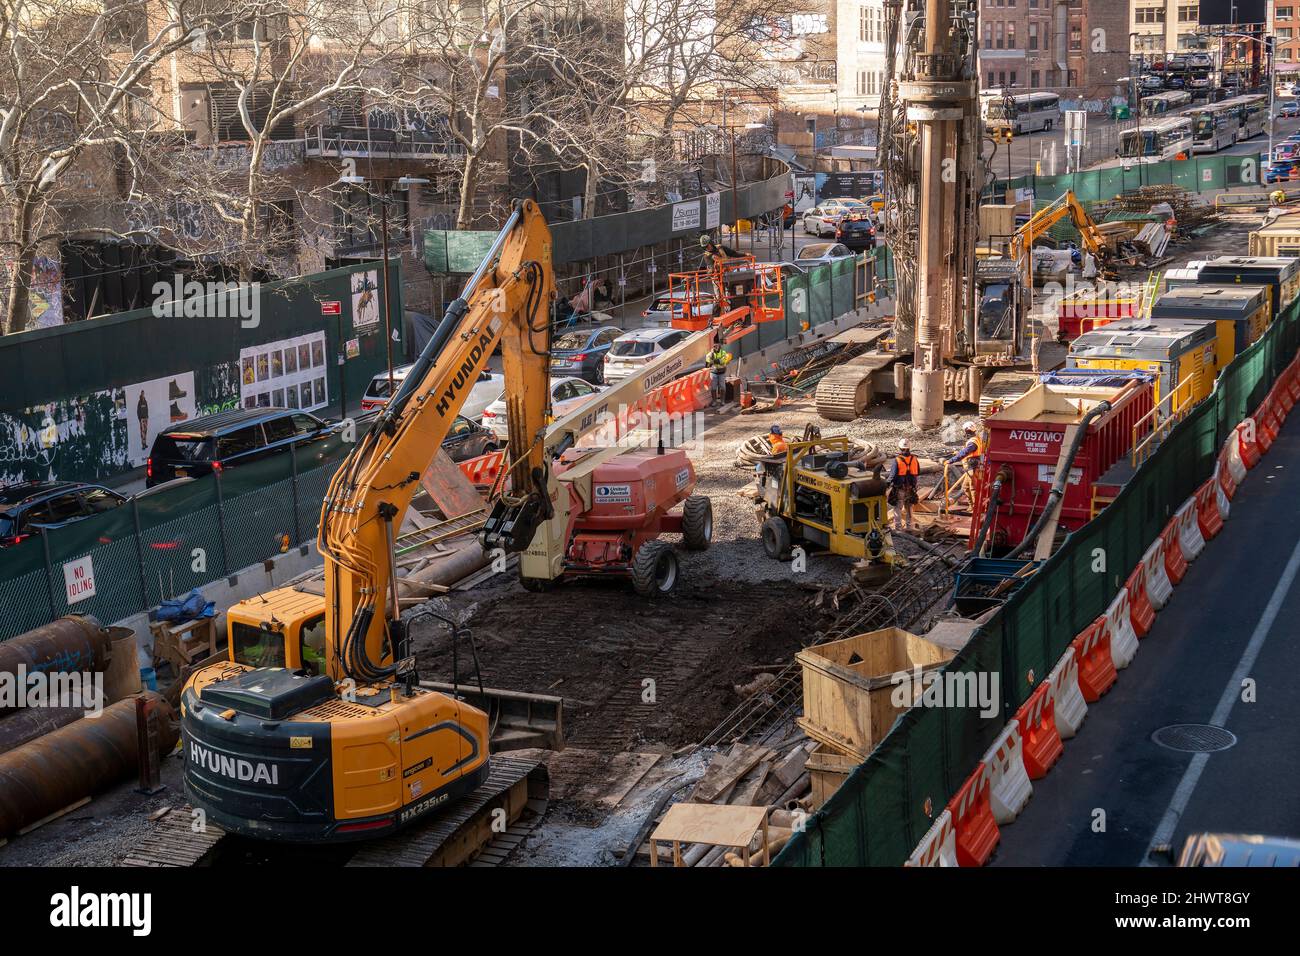 Construction is underway for the extension of the popular High Line Park over West 30th St in New York on Thursday, March 3, 2022. The $50 million connection over West St. will turn north connecting the park to the Manhattan West complex and Moynihan Train Hall. (© Richard B. Levine) Stock Photo